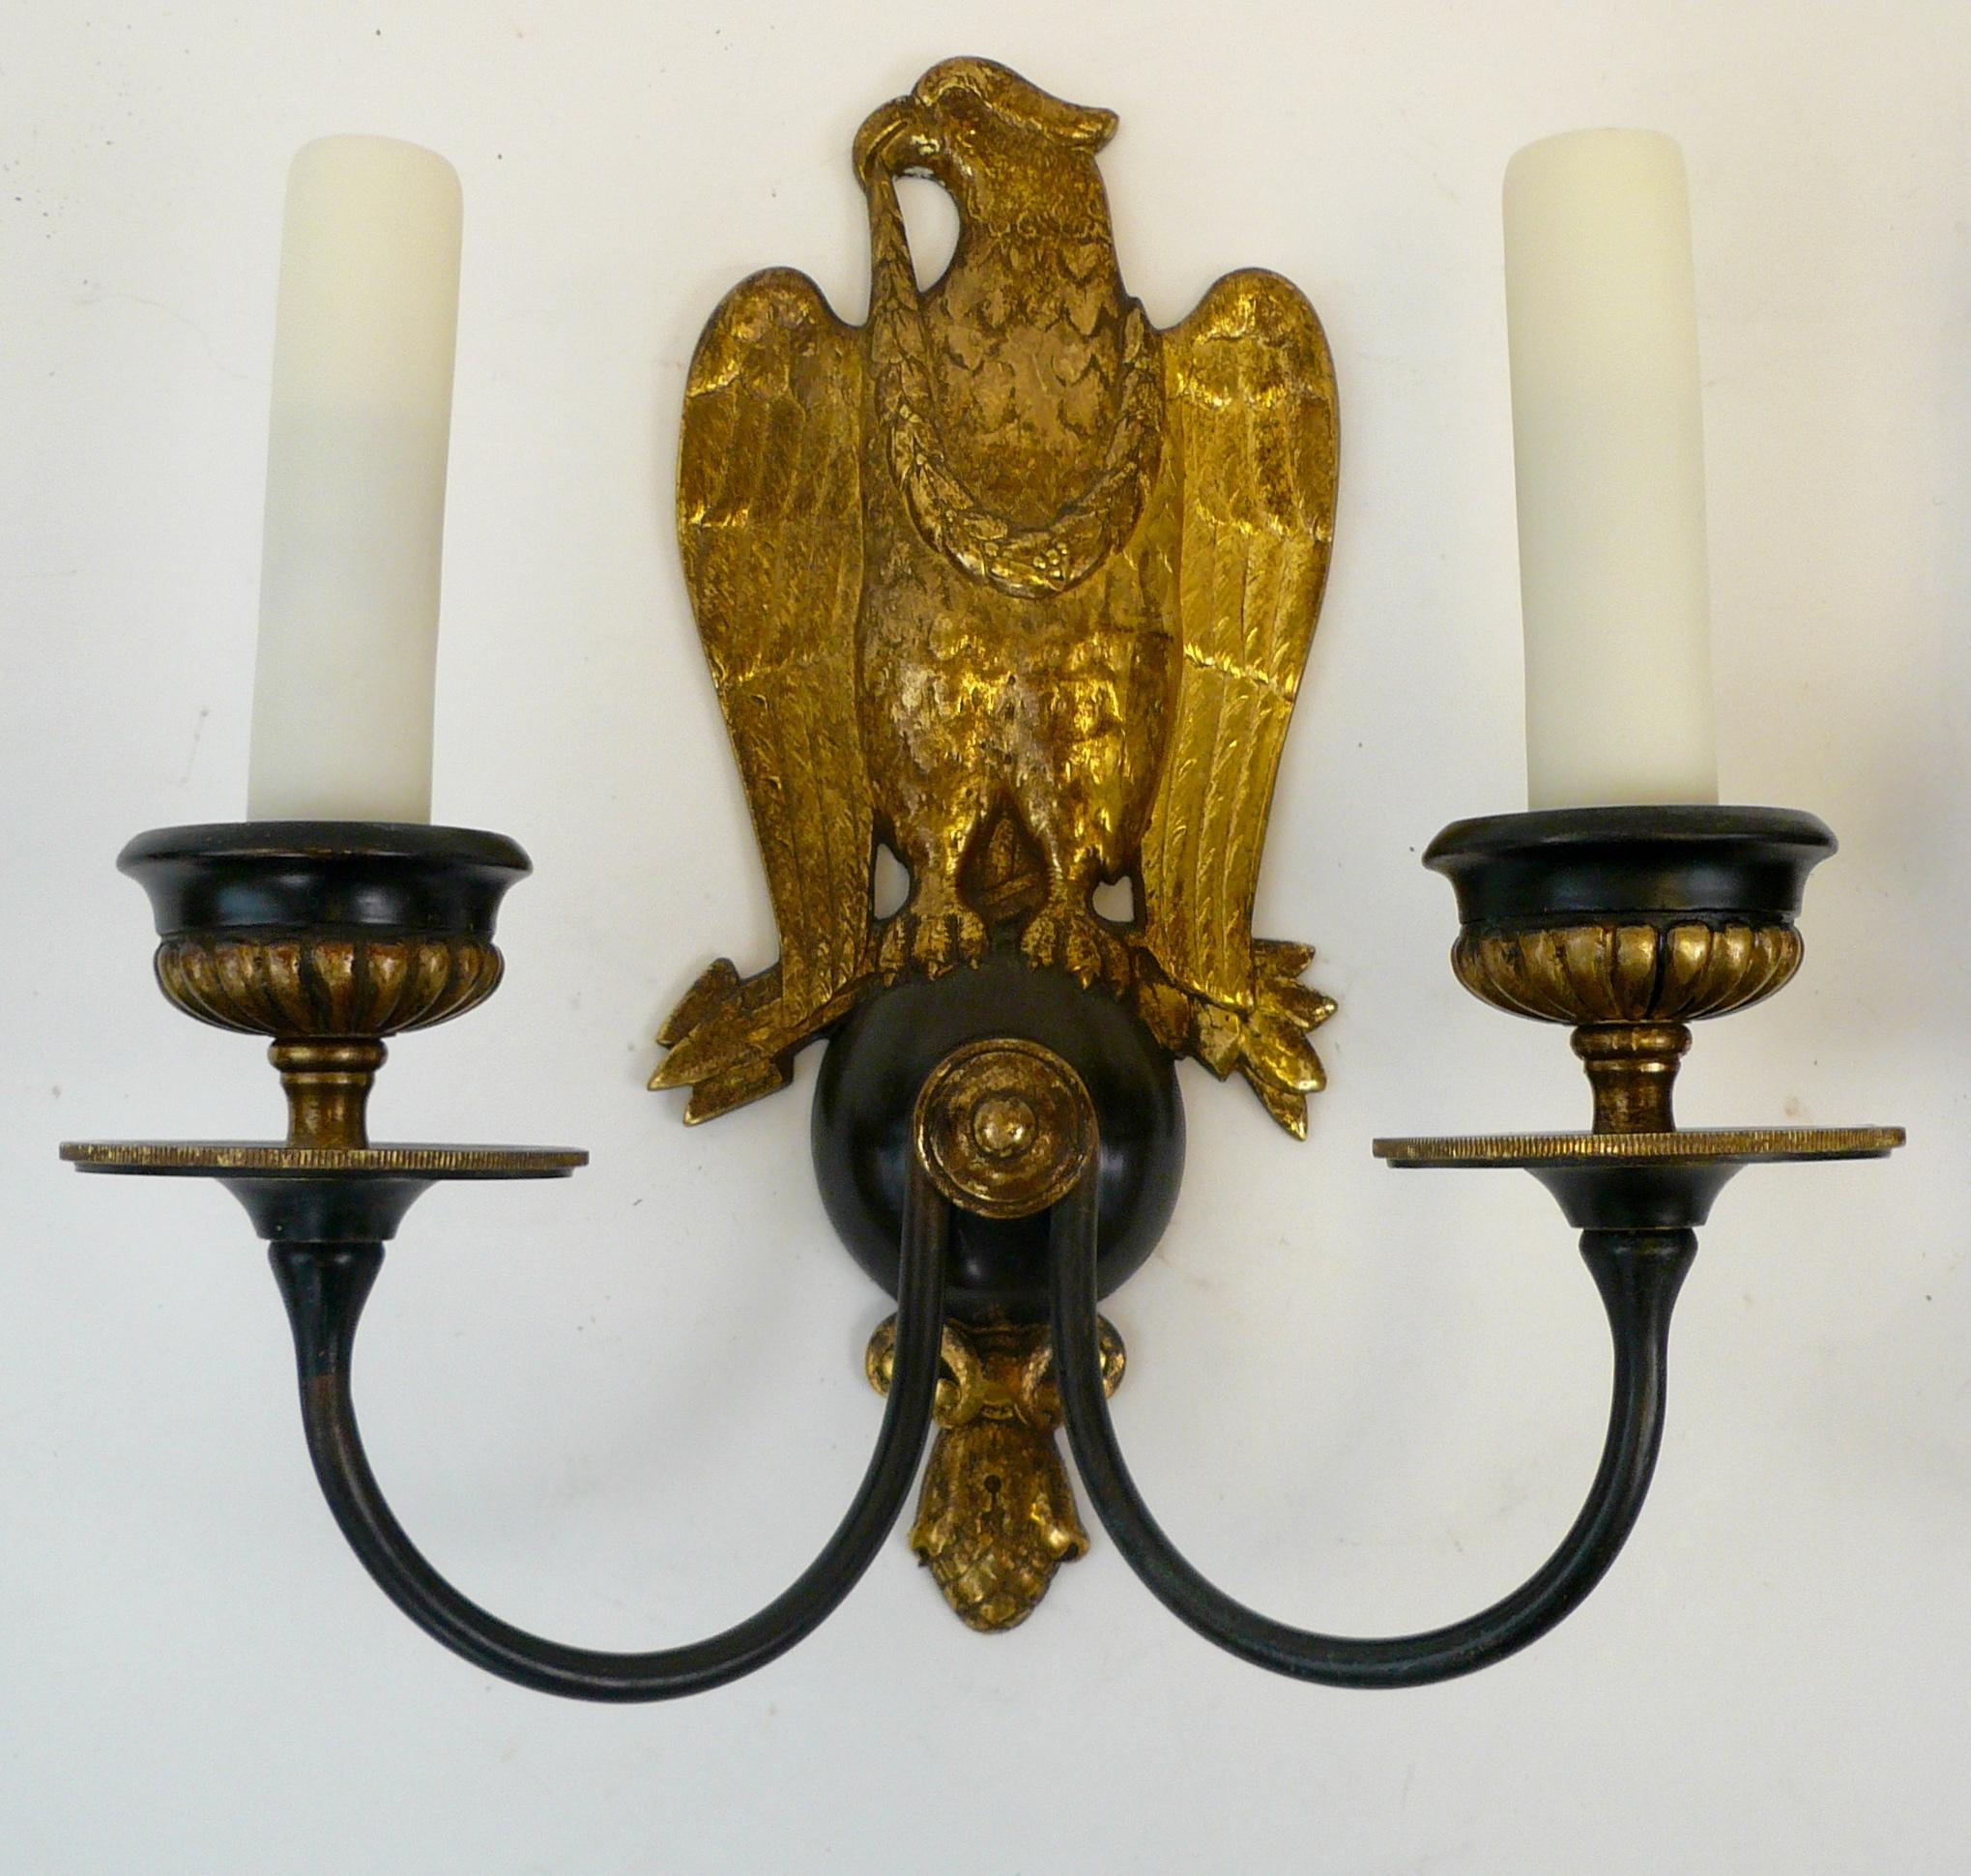 Patinated Pair of Regency Style Bronze Eagle Sconces Attributed to E, F, Caldwell